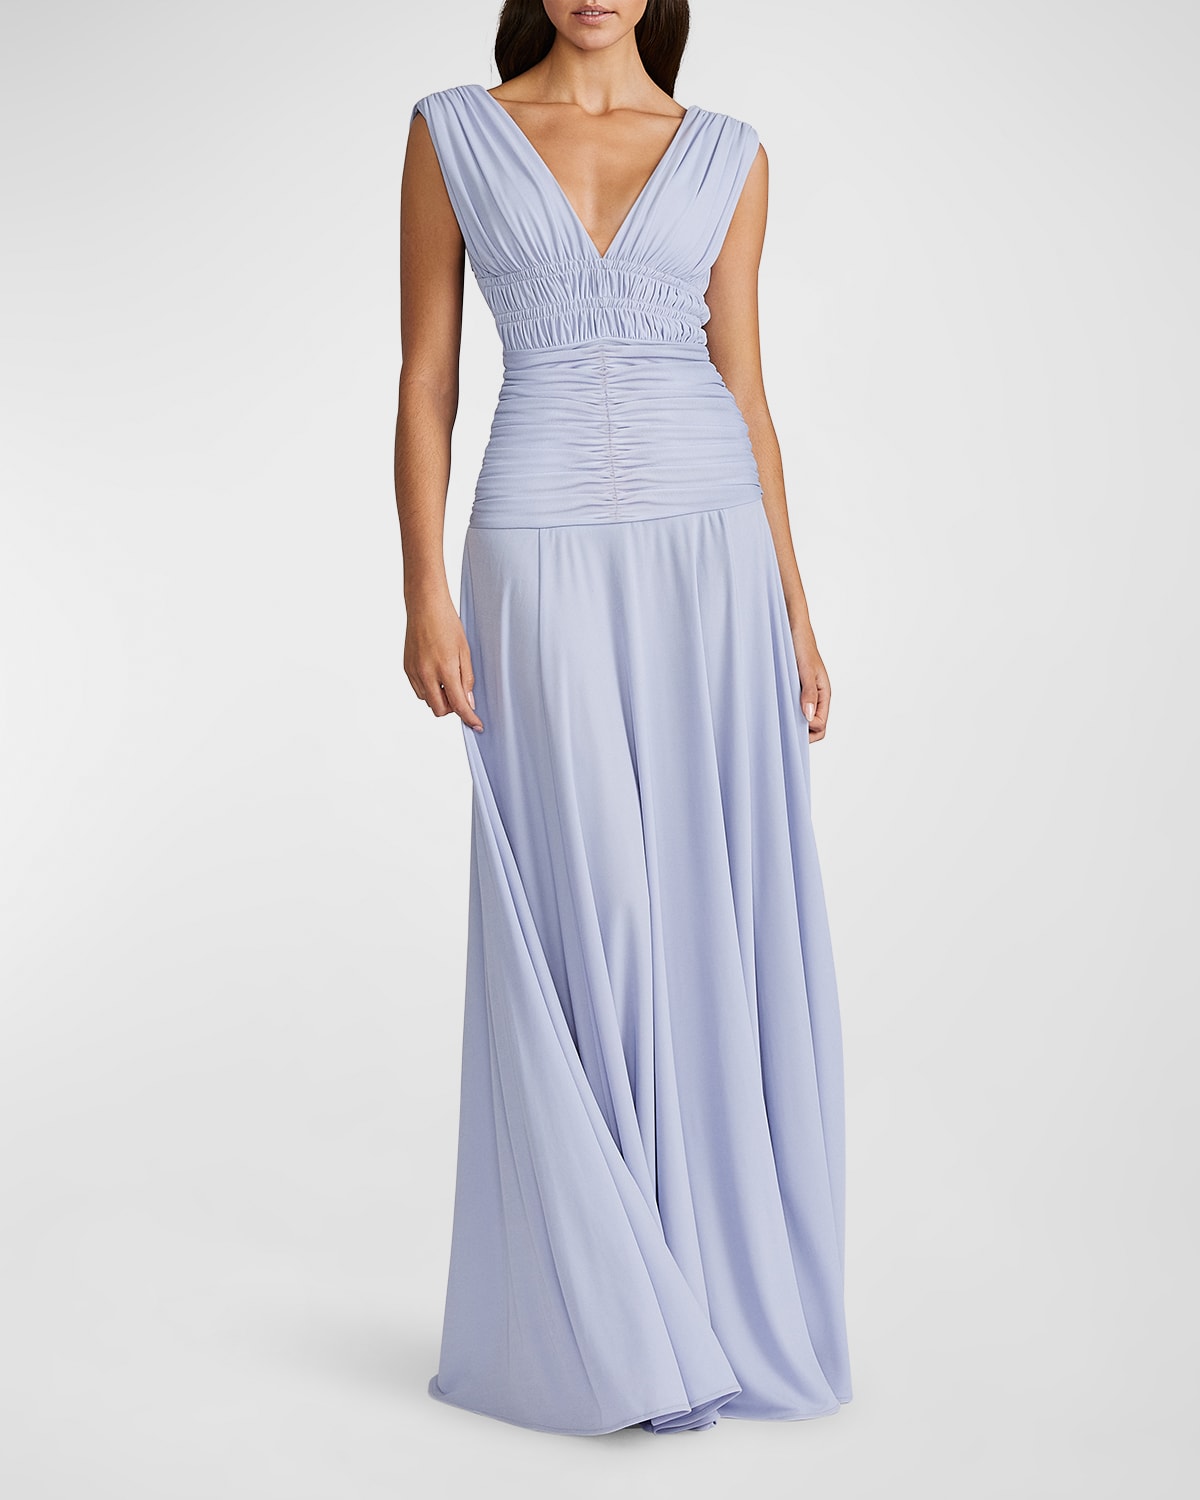 ZAC POSEN DEEP V-NECK RUCHED JERSEY GOWN